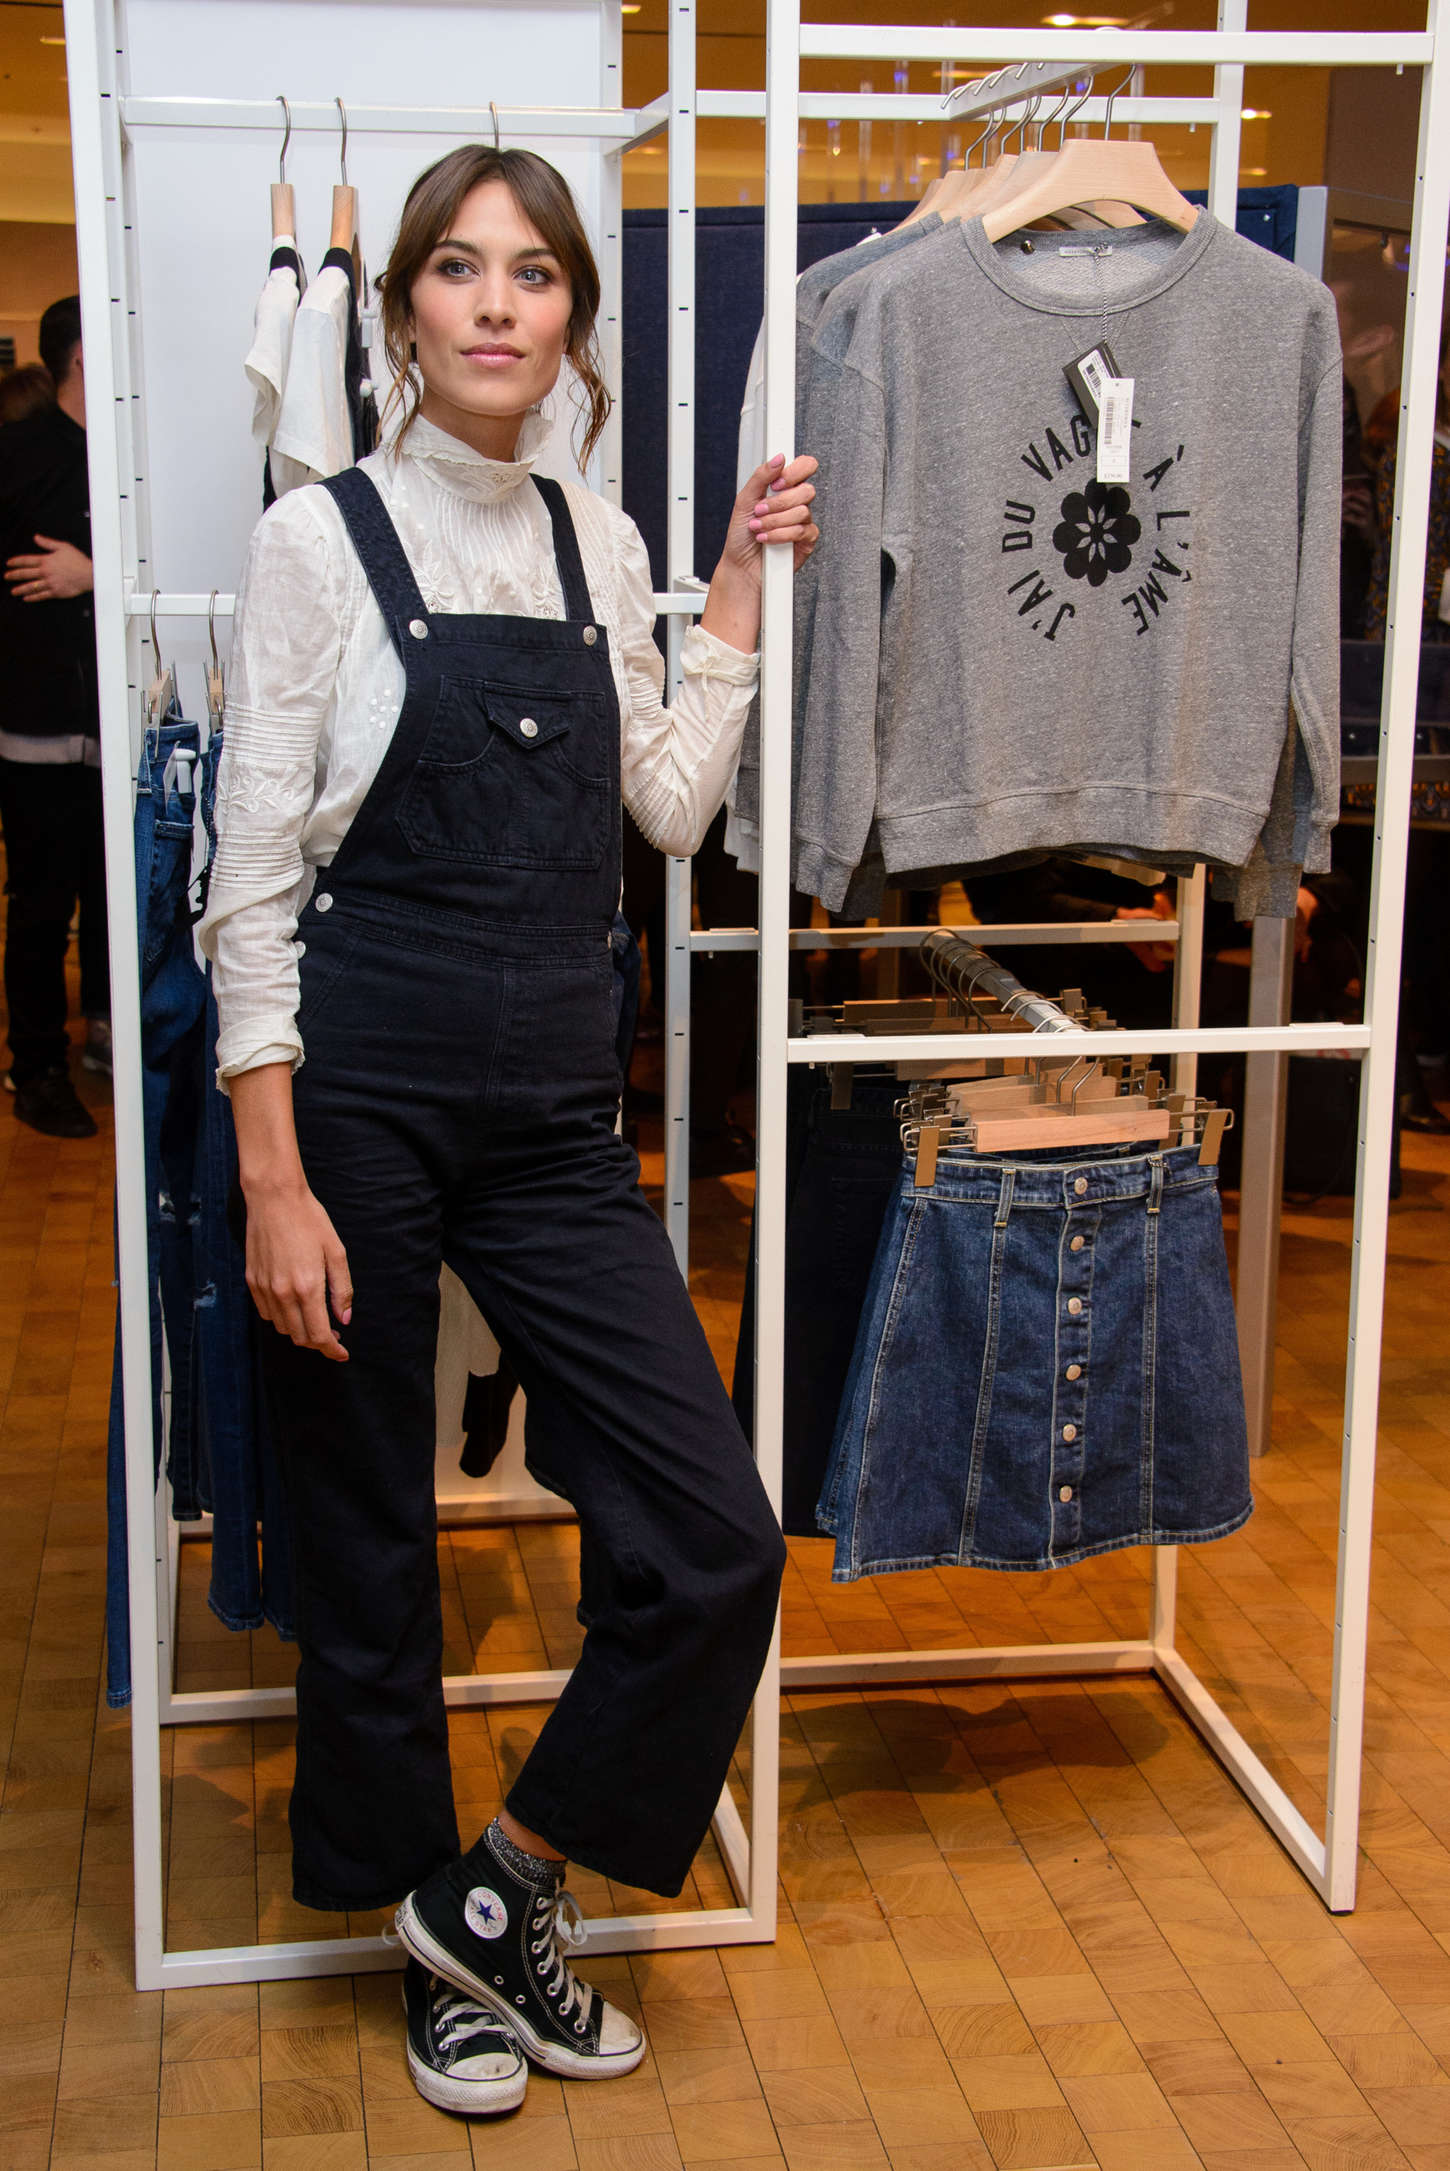 Alexa Chung launched her denim collection last night and 